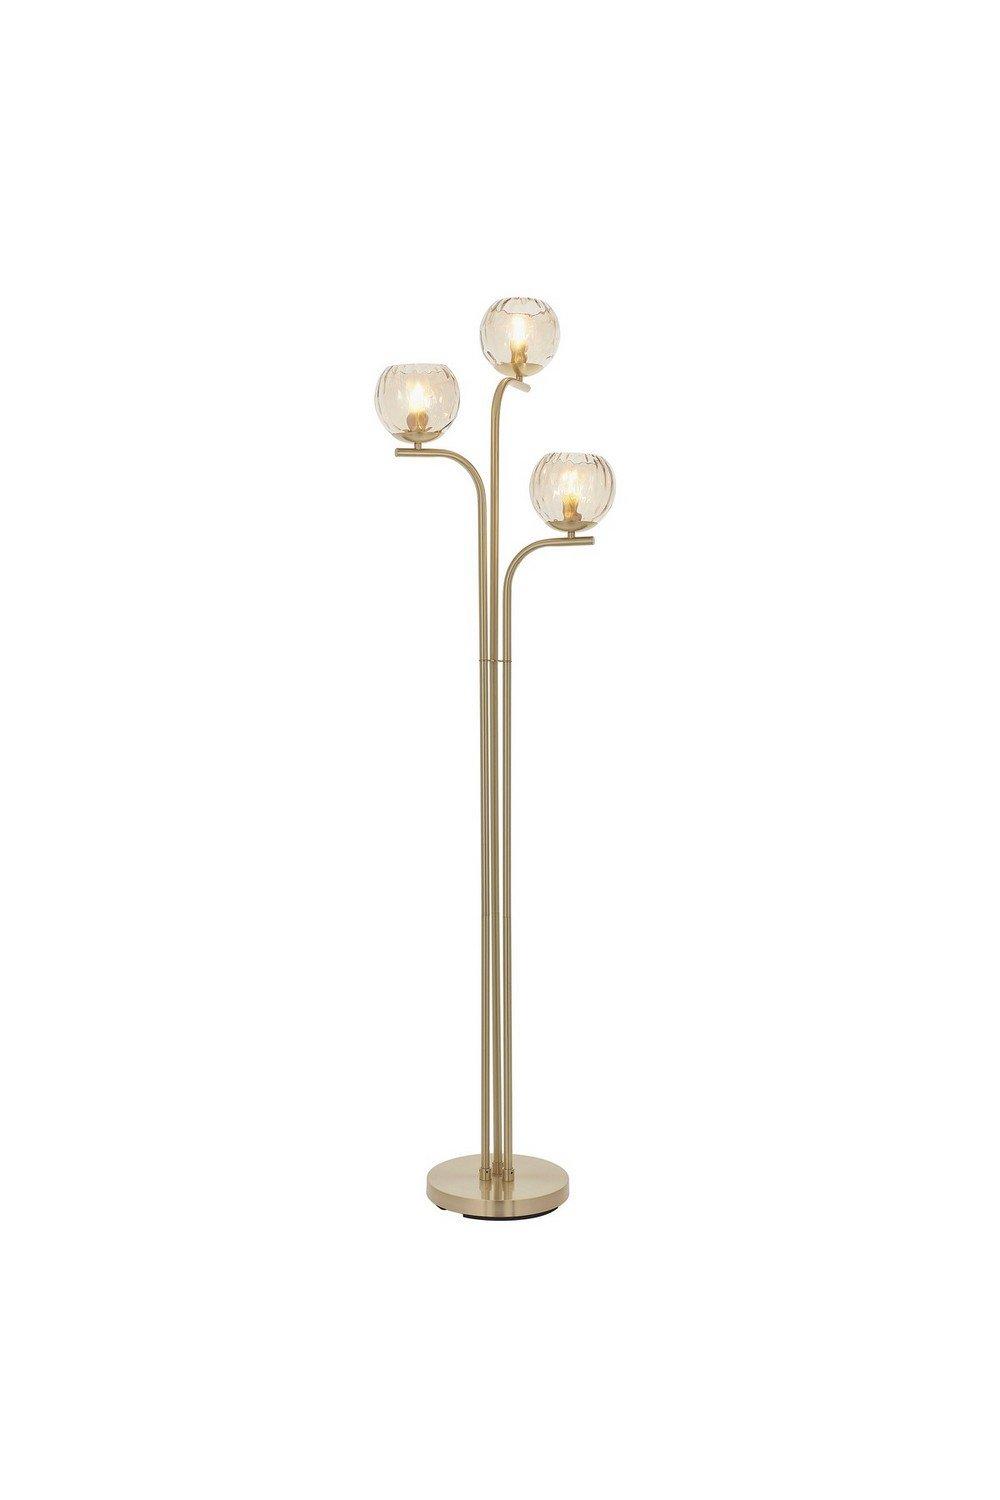 Dimple Complete Floor Lamp Satin Brass Plate Champagne Lustre Glass